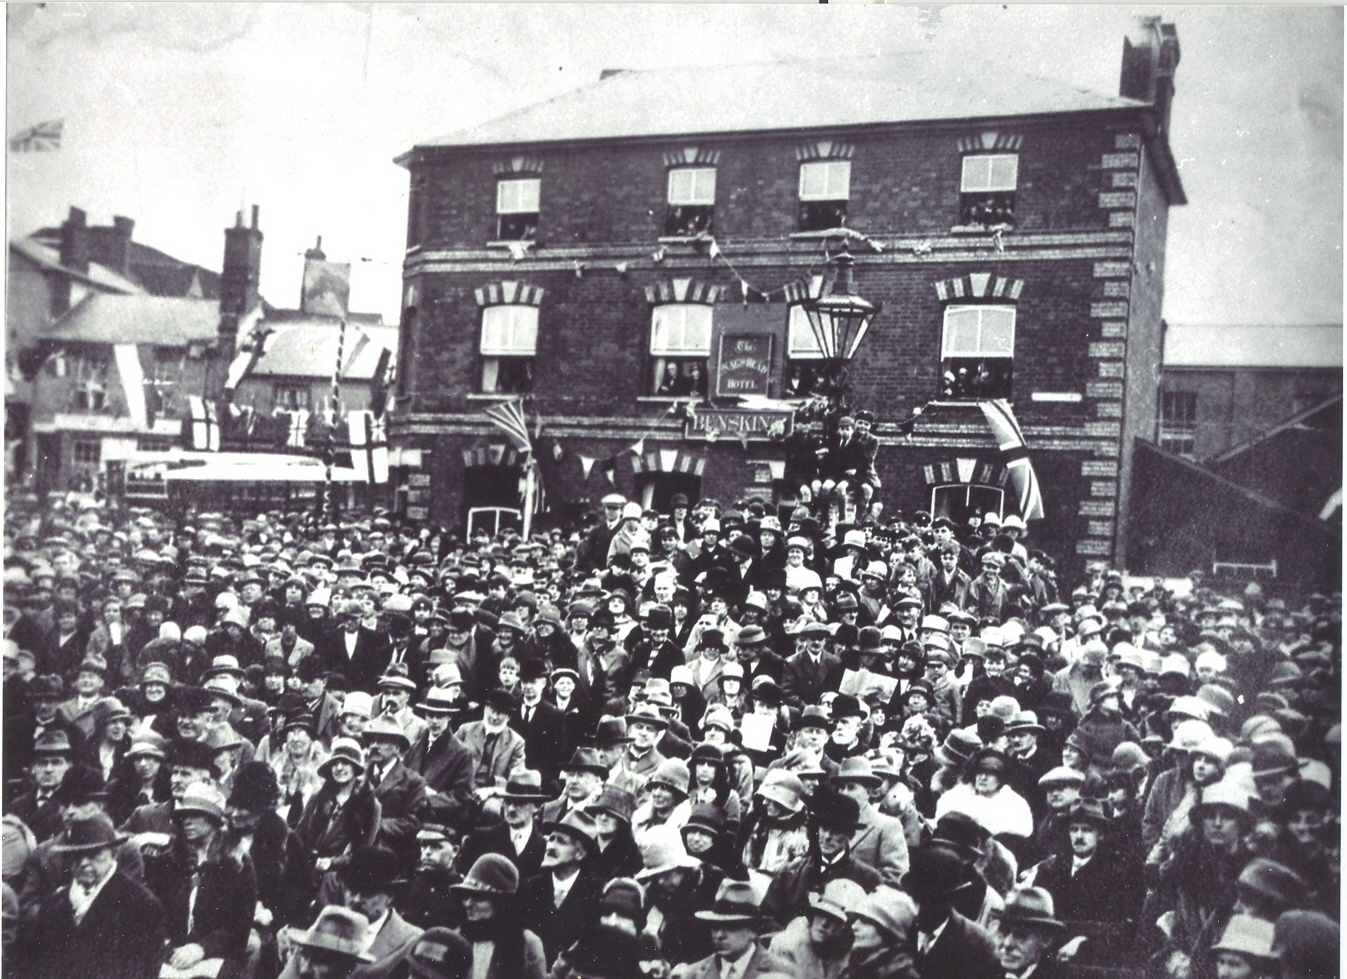 photograph of a crowd outside the town hall in 1928